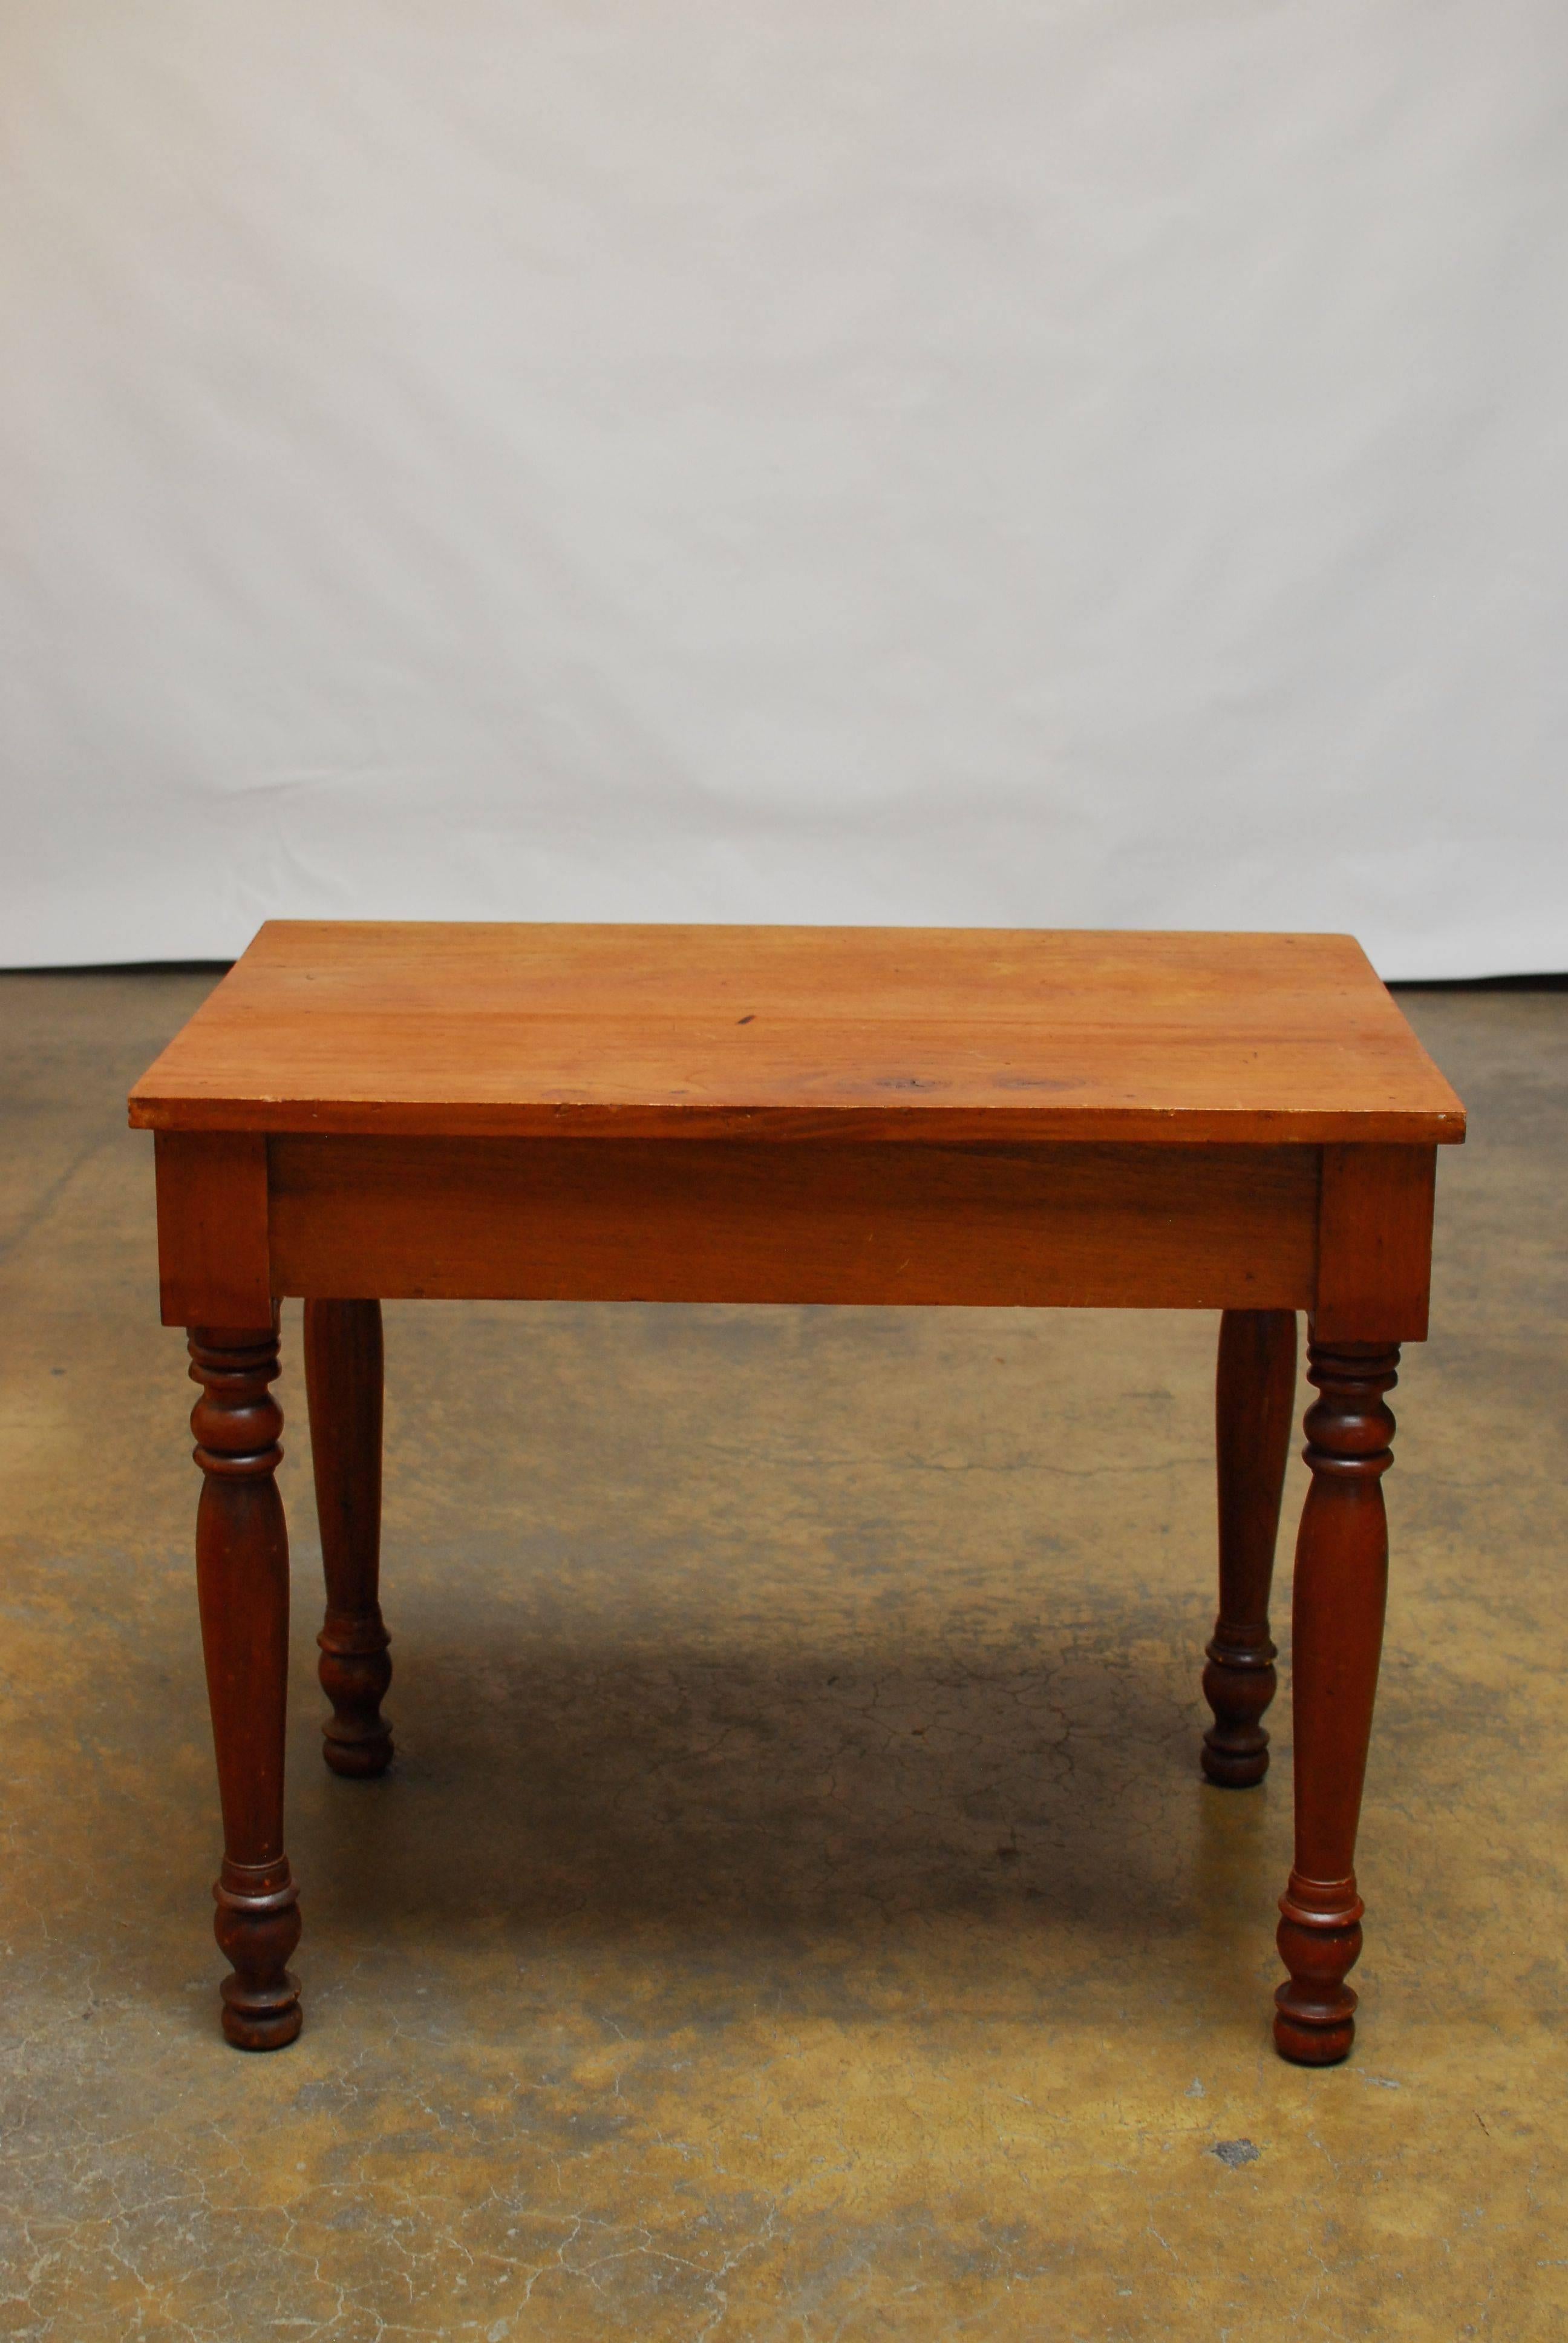 Primitive American farm table desk or work table made of walnut and fronted by one large drawer with wooden pulls and dividers inside. Thick top slab of wood with a rich worn patina. Sits on long, turned legs and is very sturdy. The case is